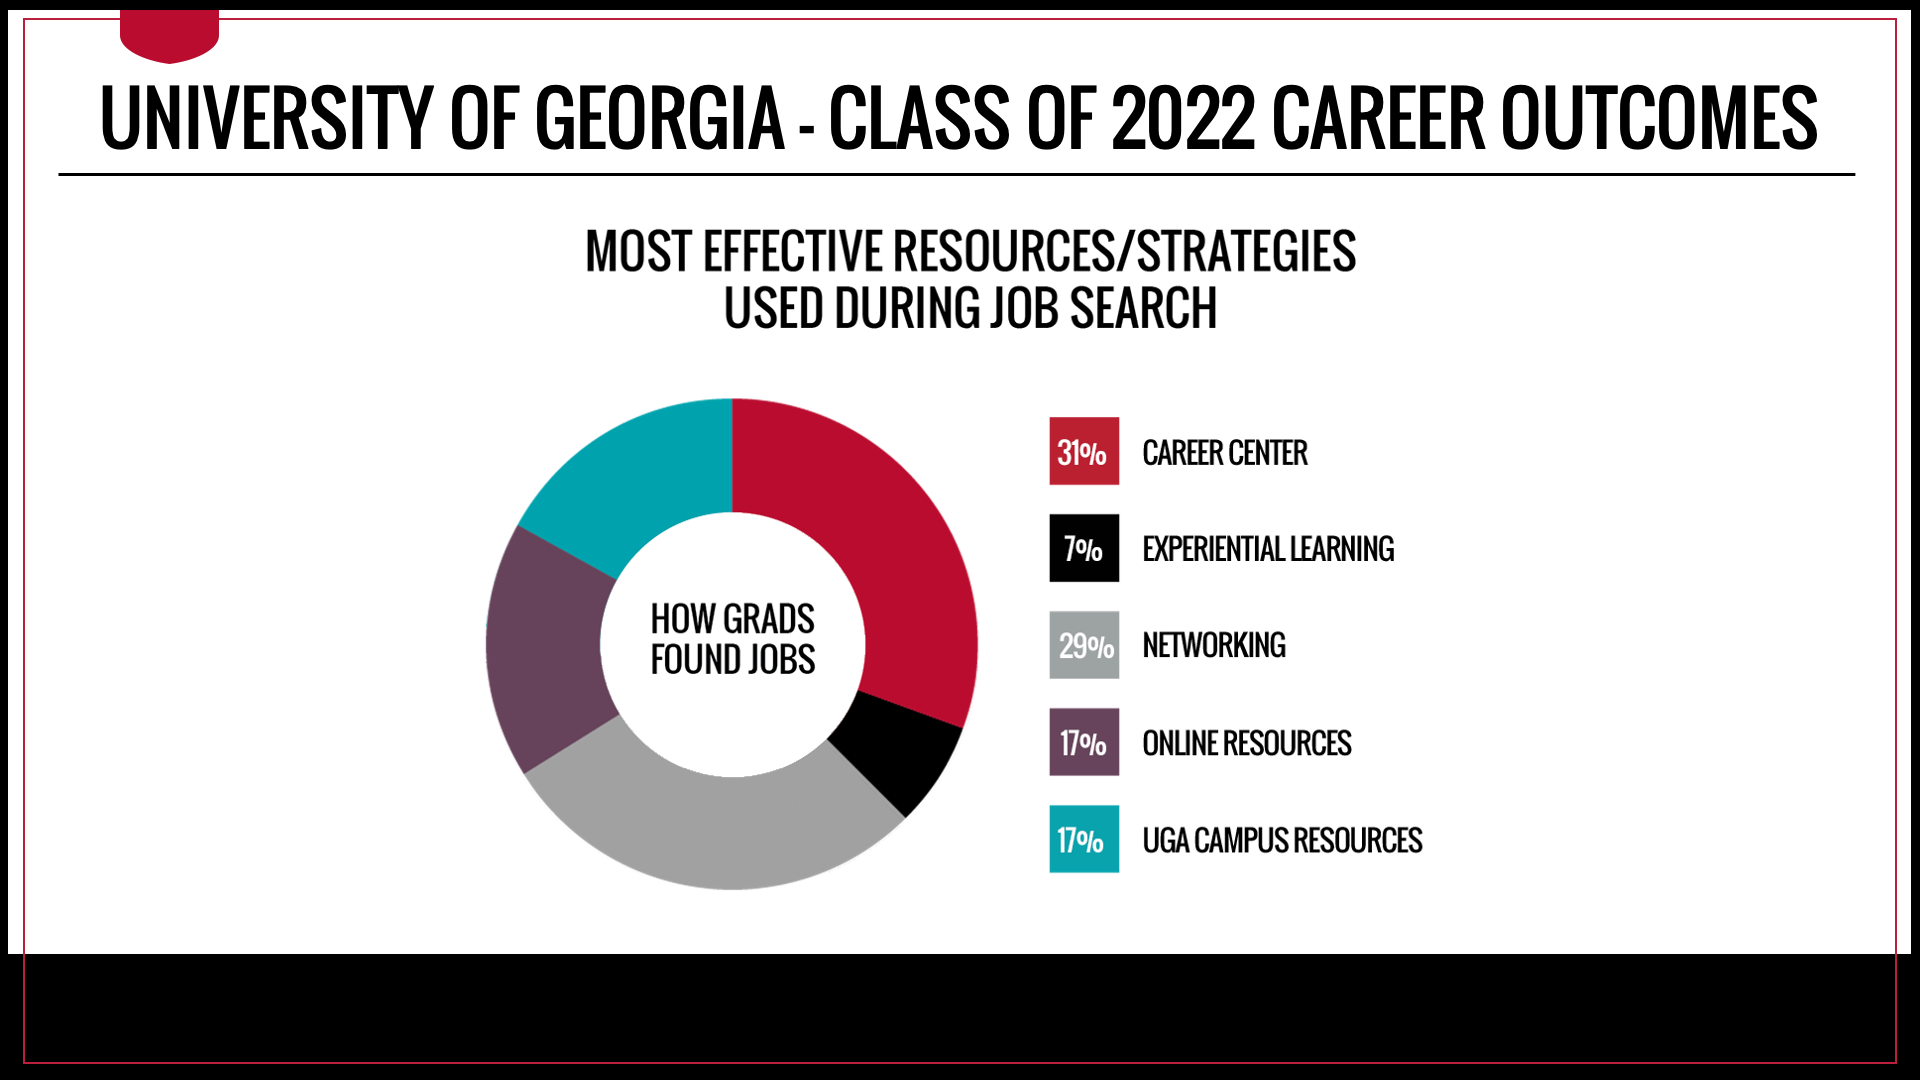 How graduates found jobs - 31% UGA Career Center - 7% Experiential Learning - 29% Networking outside UGA - 17% Online Resources - 17% UGA Campus Resources